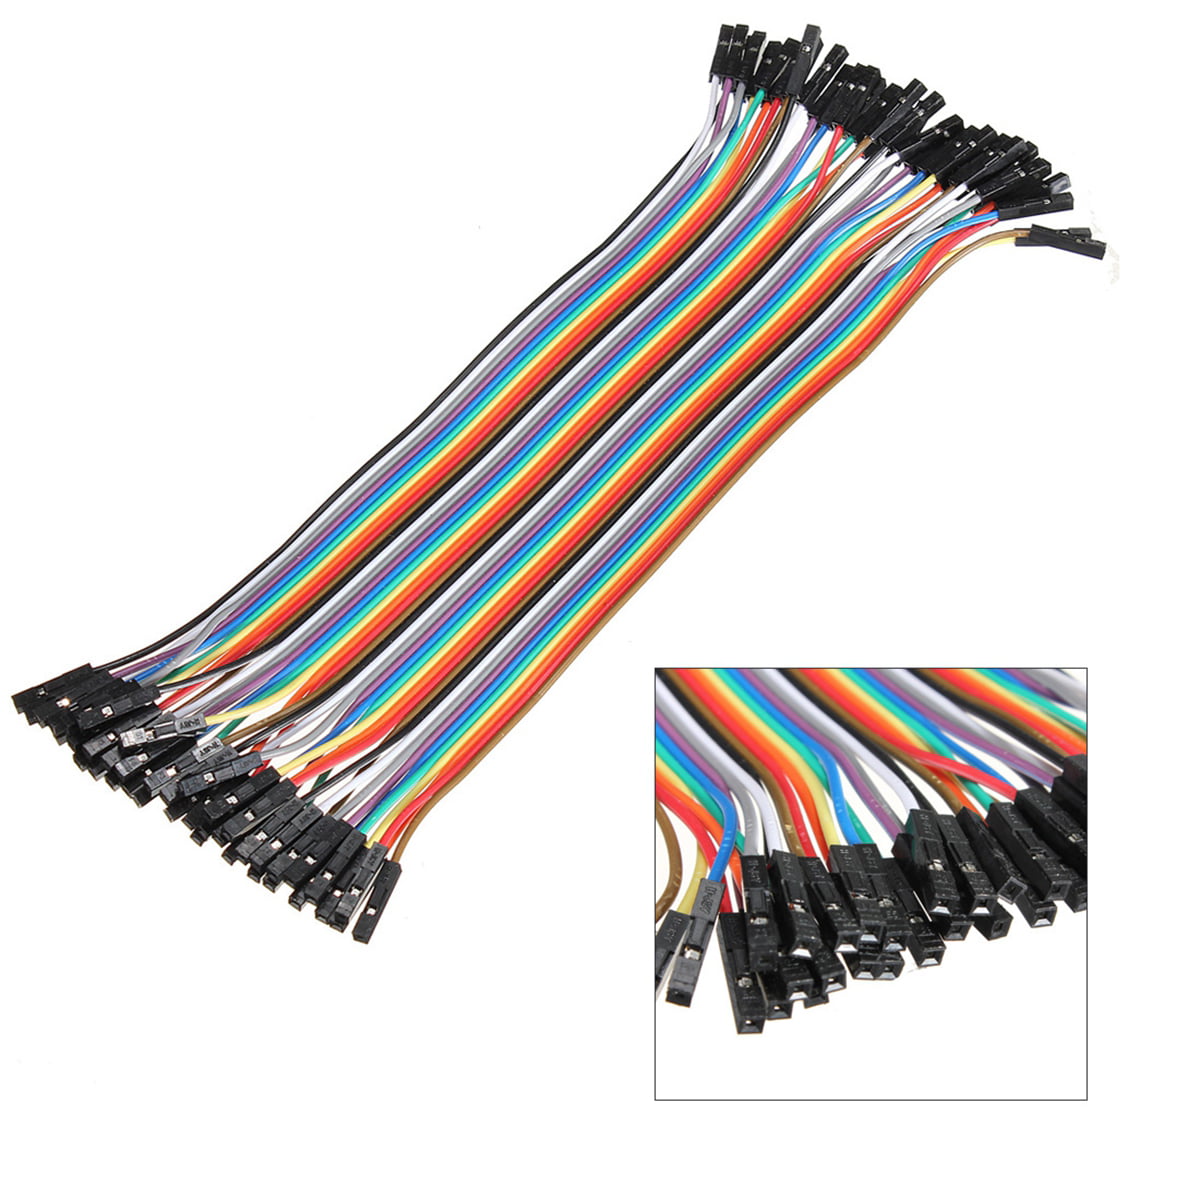 5PCS For Arduino Shield 40pcs×20cm Male to Female Wire Jumper Dupont cables 